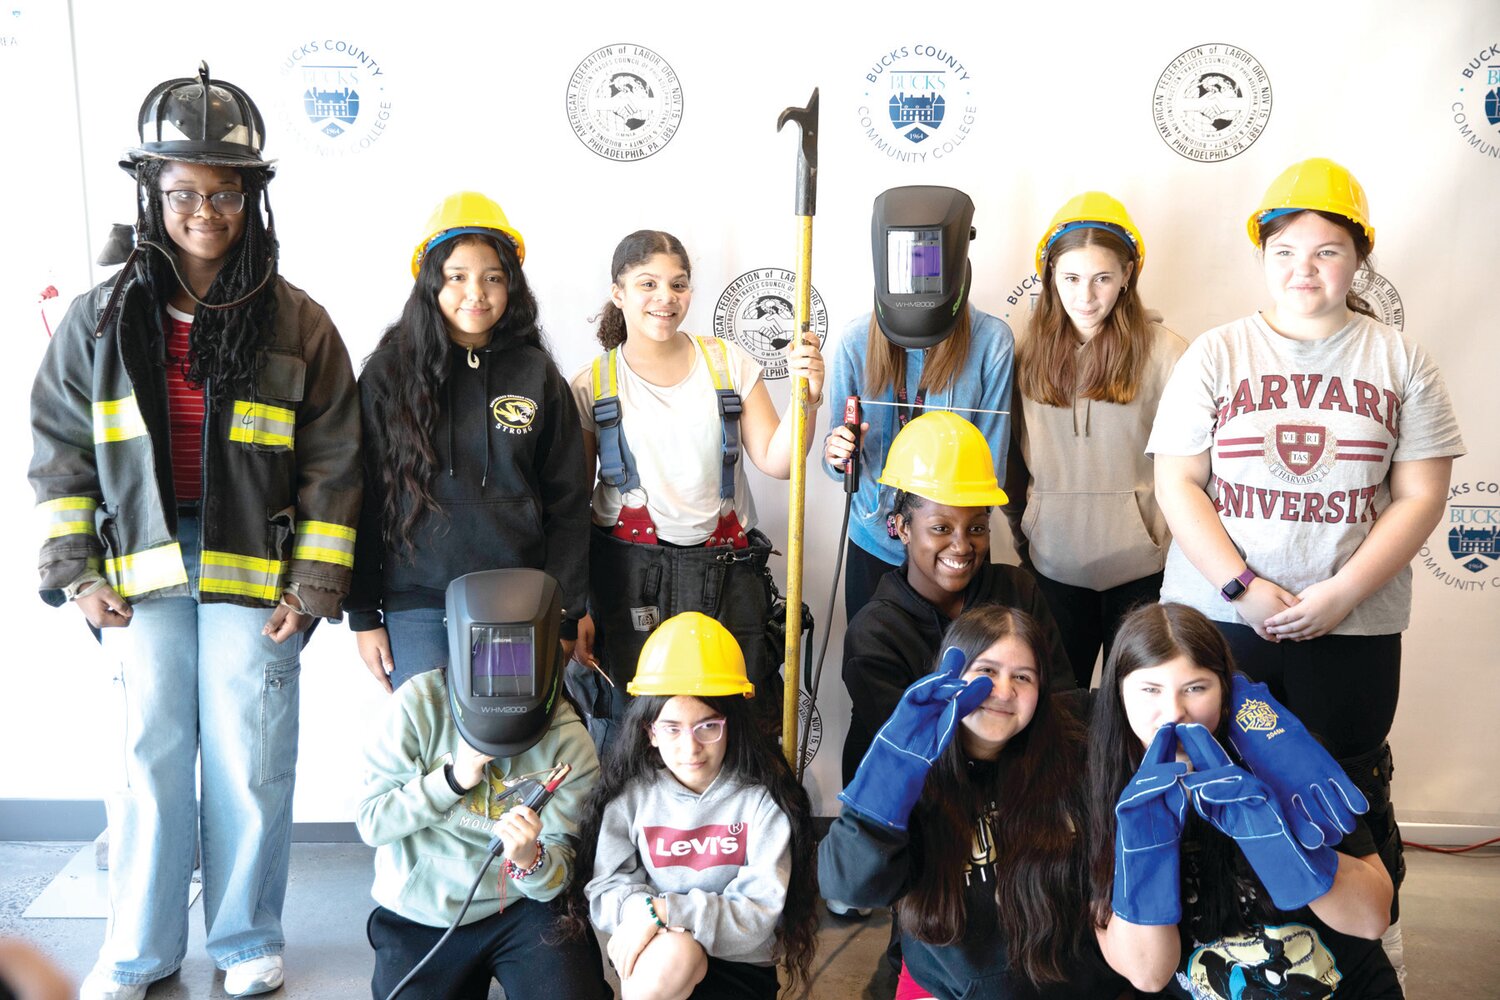 Female middle school students from Bristol Township School District representing various building and construction trades as well as emergency responders pose for a group photo during Girls Ignite, a one-day career expo made possible by the Philadelphia Building & Construction Council and Bucks County Community College.